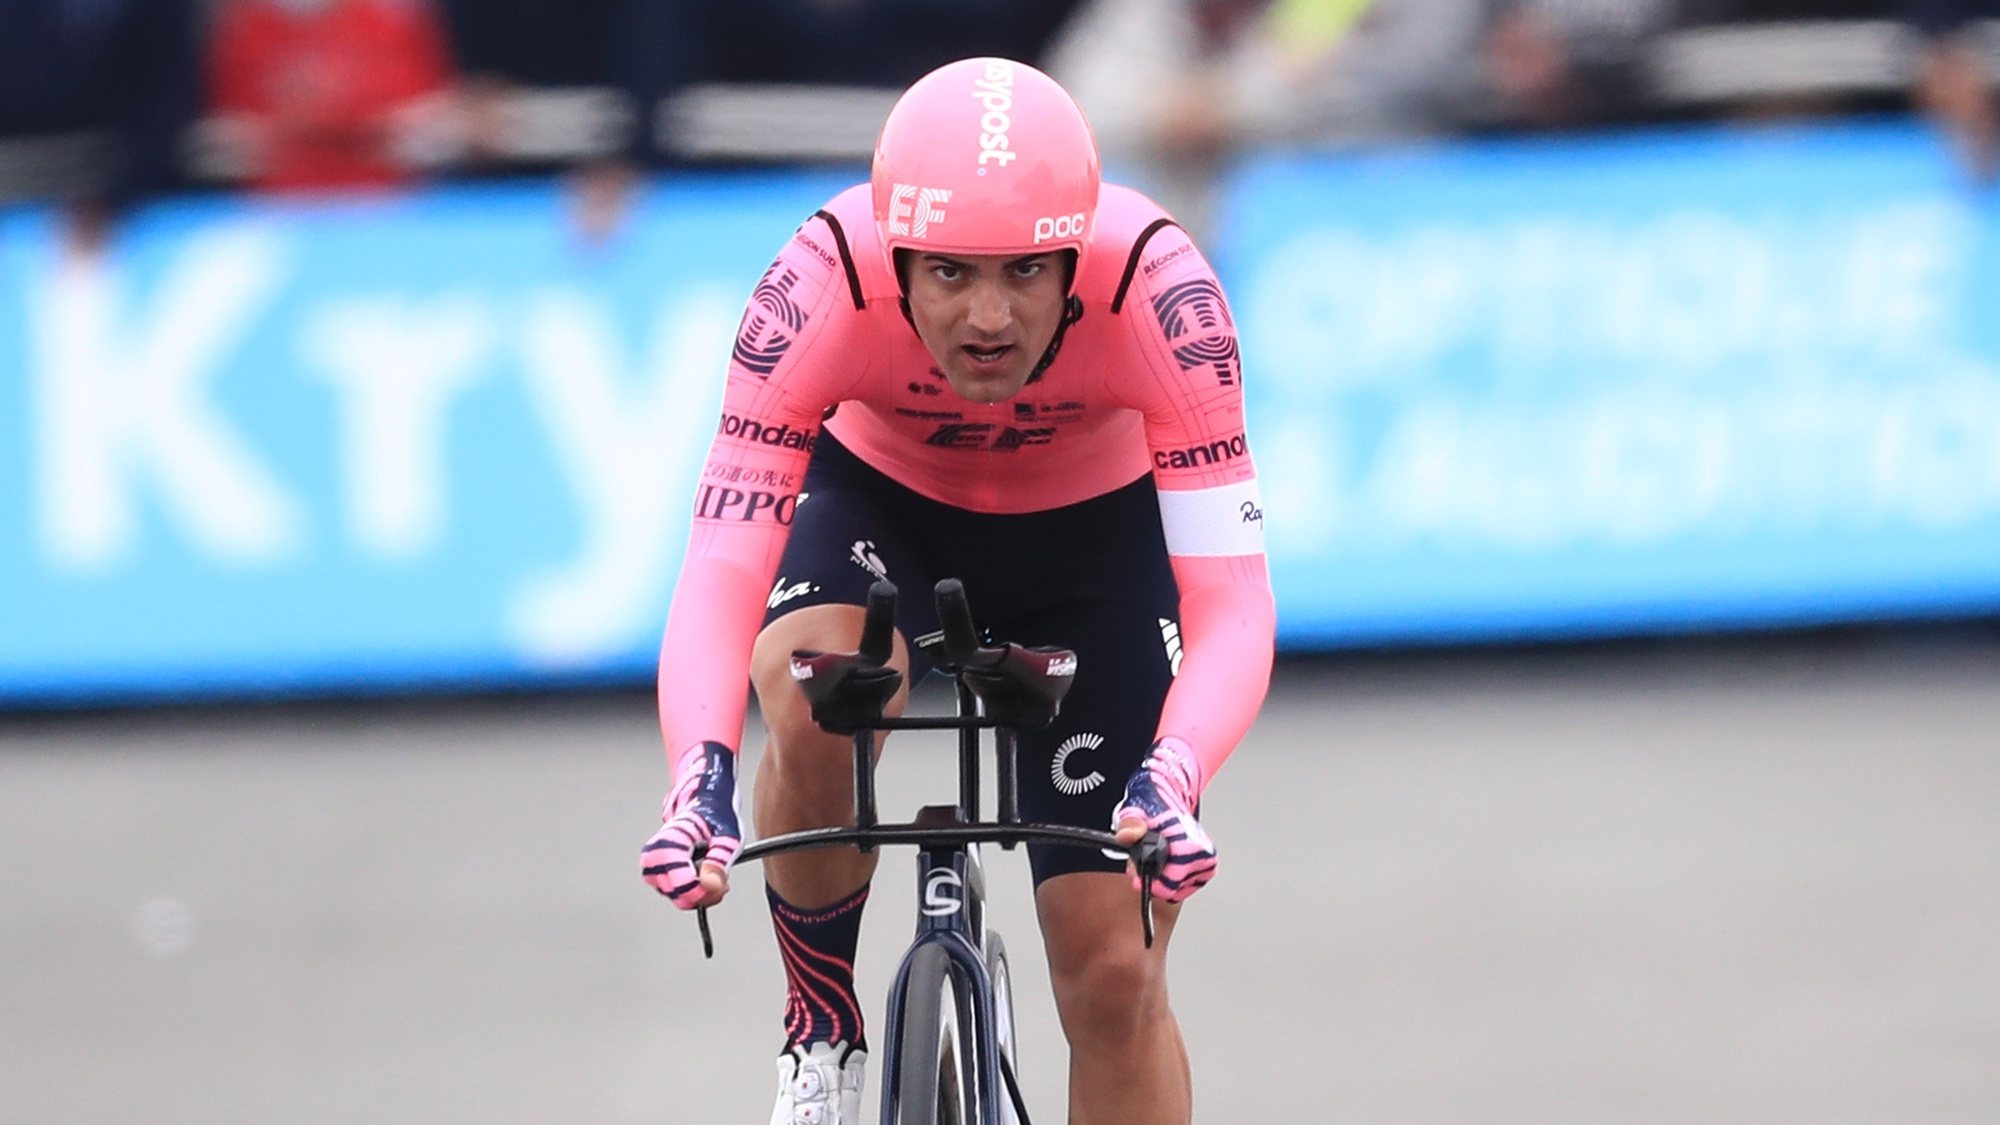 epa09313469 Portuguese rider Ruben Guerreiro of the EF Education-Nippo team approaches the finish line during the 5th stage of the Tour de France 2021, an individual time trial over 27.2 km from Change to Laval Espace Mayenne, France, 30 June 2021.  EPA/Christophe Petit Tesson / POOL